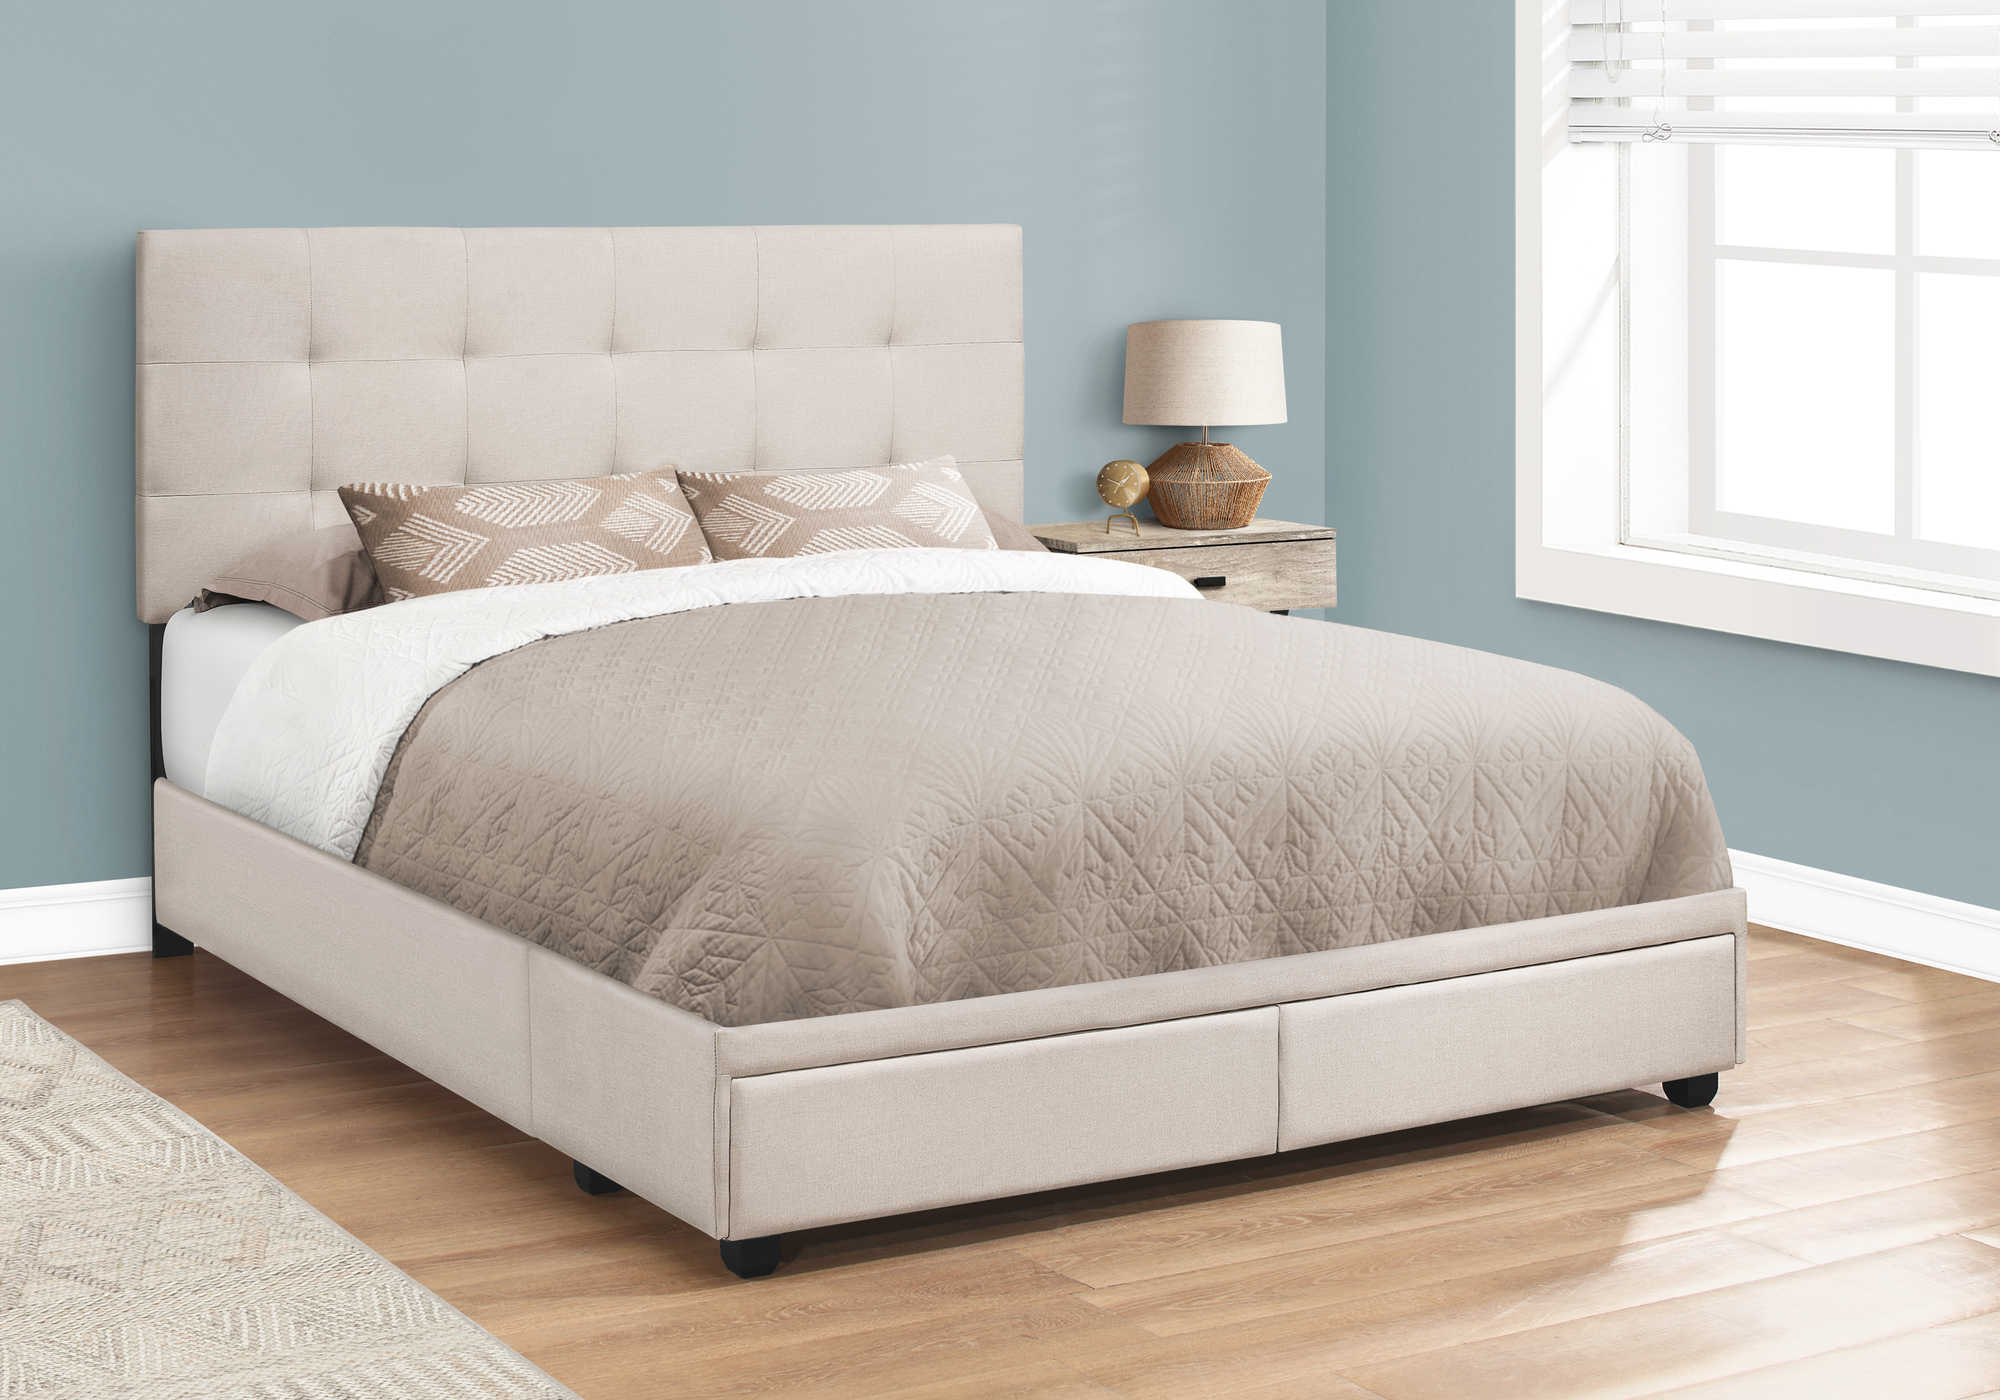 BED - QUEEN SIZE / BEIGE LINEN WITH 2 STORAGE DRAWERS